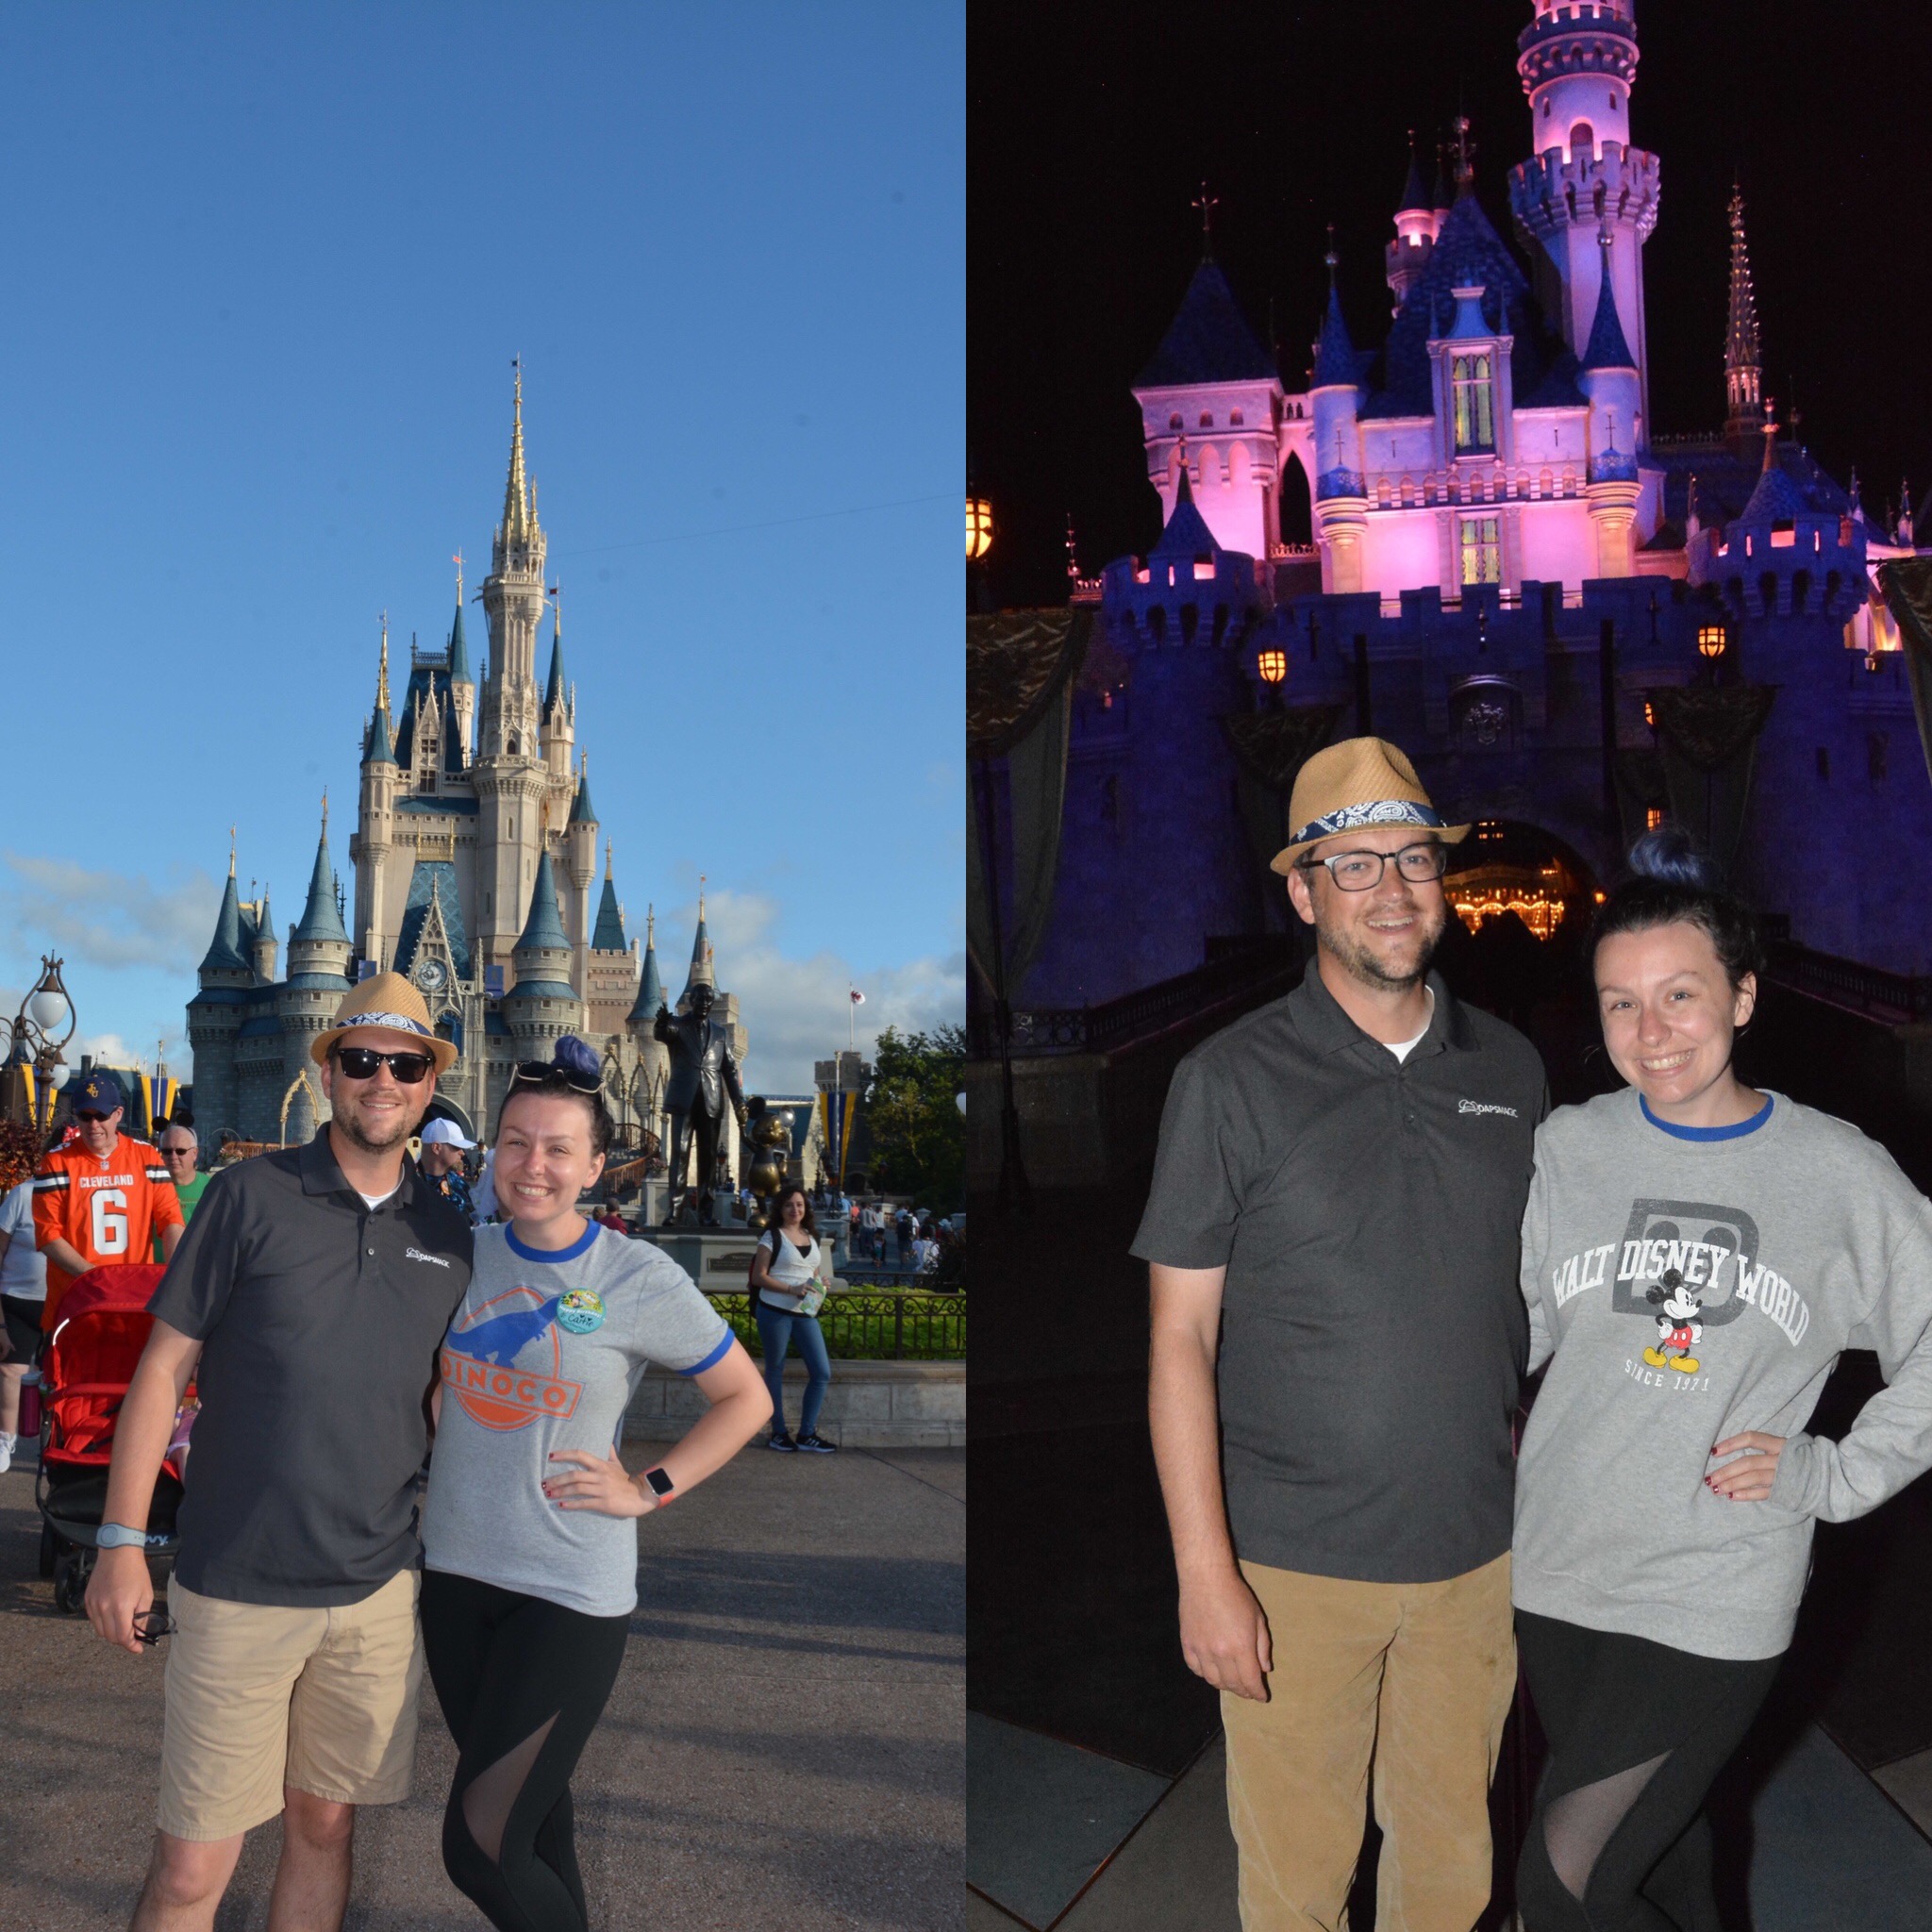 Go From Cinderella Castle to Sleeping Beauty Castle with the DAPs MAGIC Crew on the Last Day of the Walt Disney World Vacation